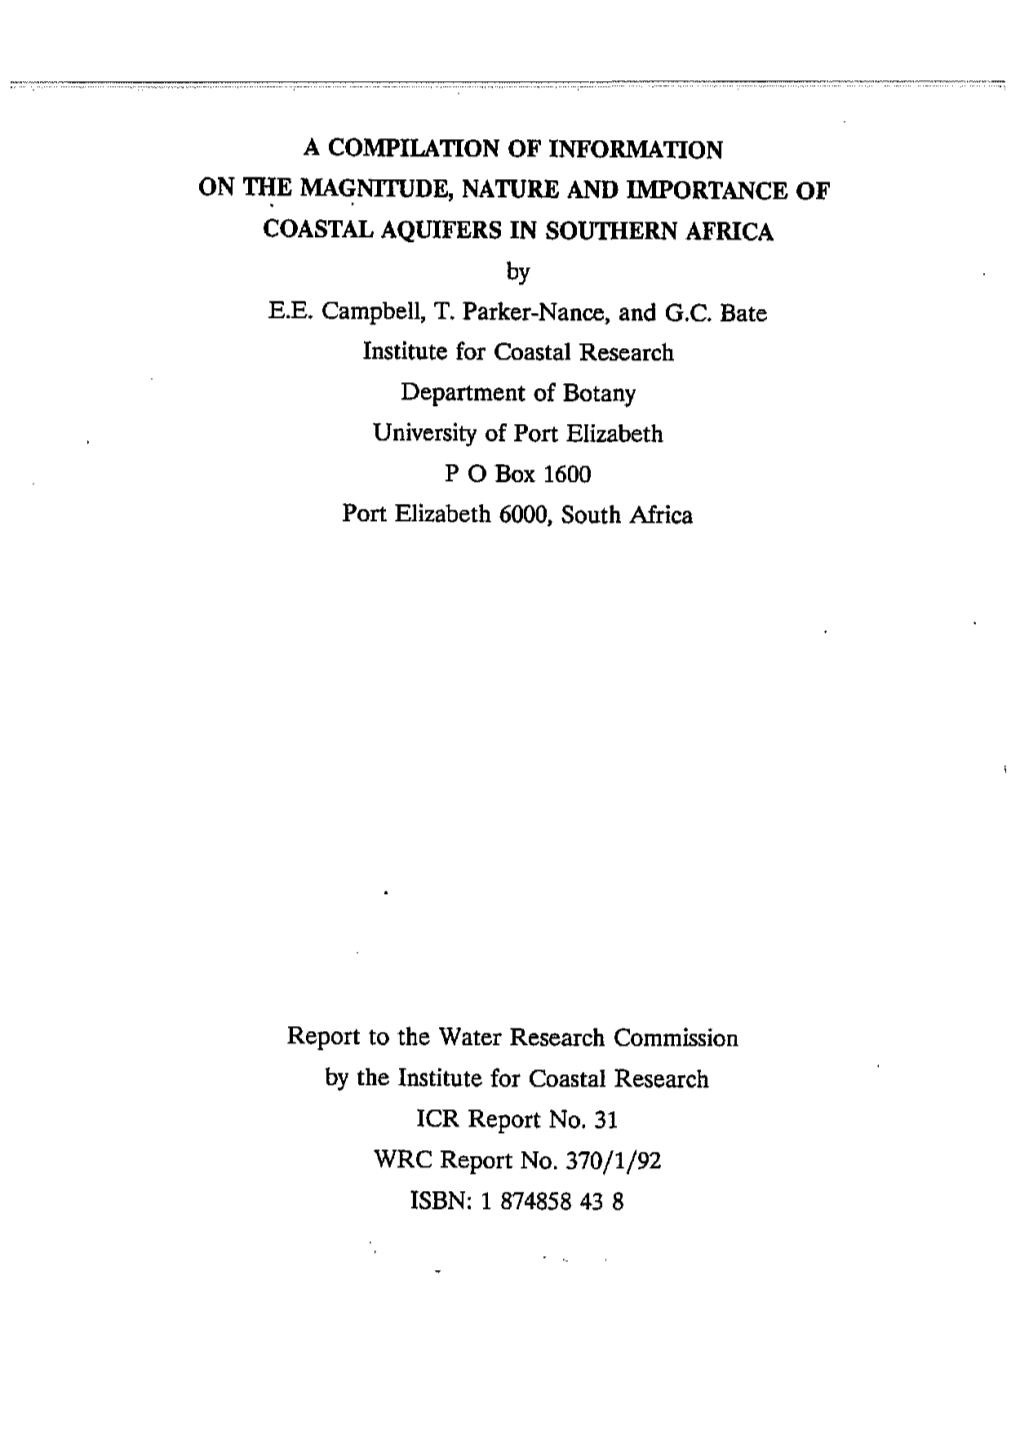 A COMPILATION of INFORMATION on the MAGNITUDE, NATURE and IMPORTANCE of COASTAL AQUIFERS in SOUTHERN AFRICA by E.E